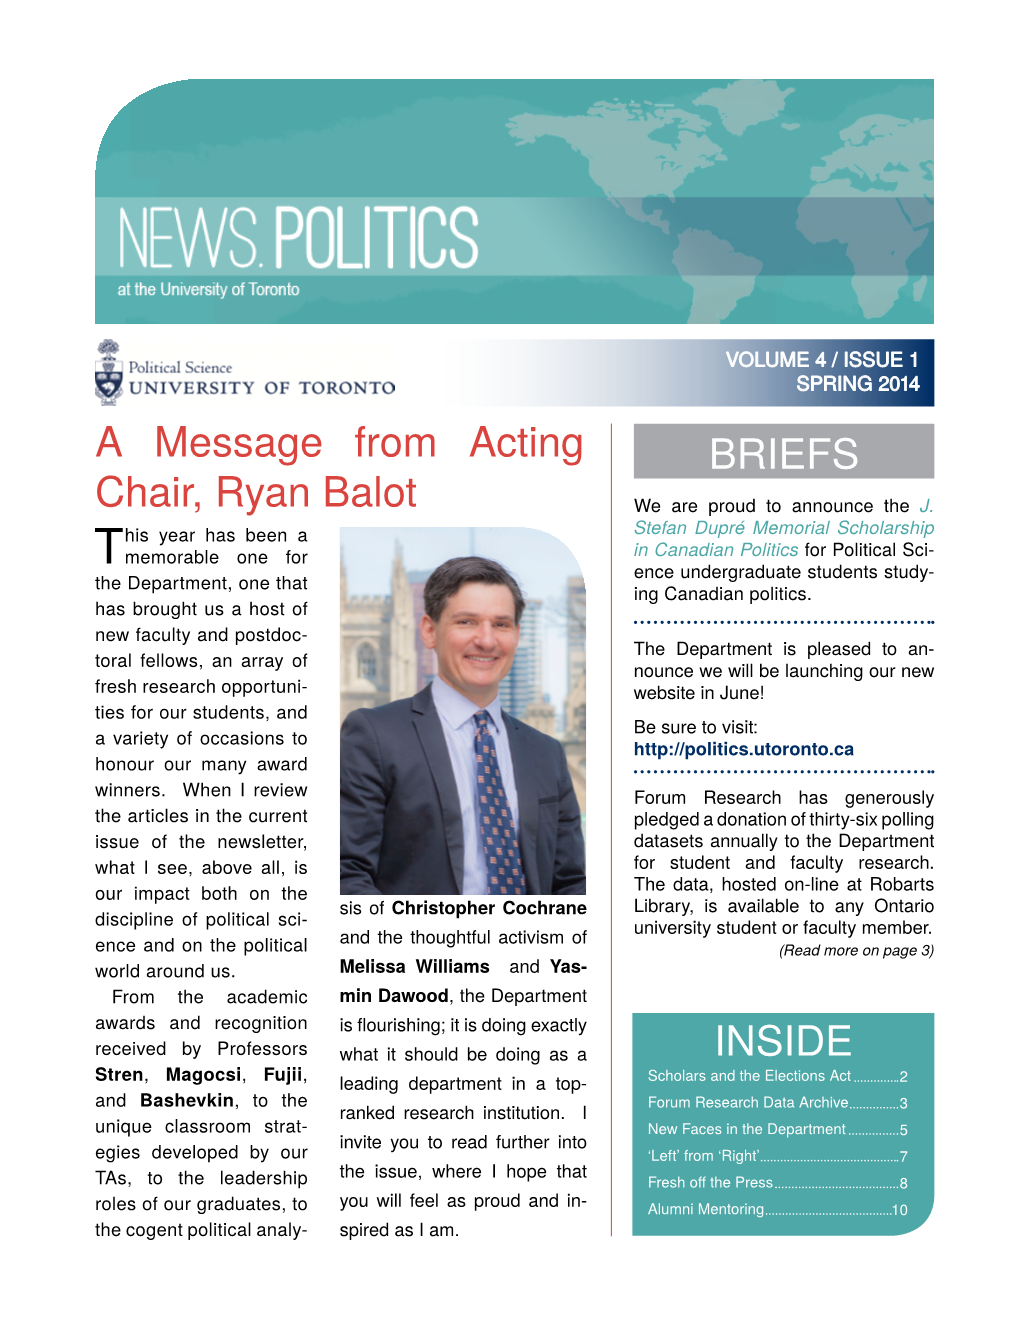 A Message from Acting Chair, Ryan Balot